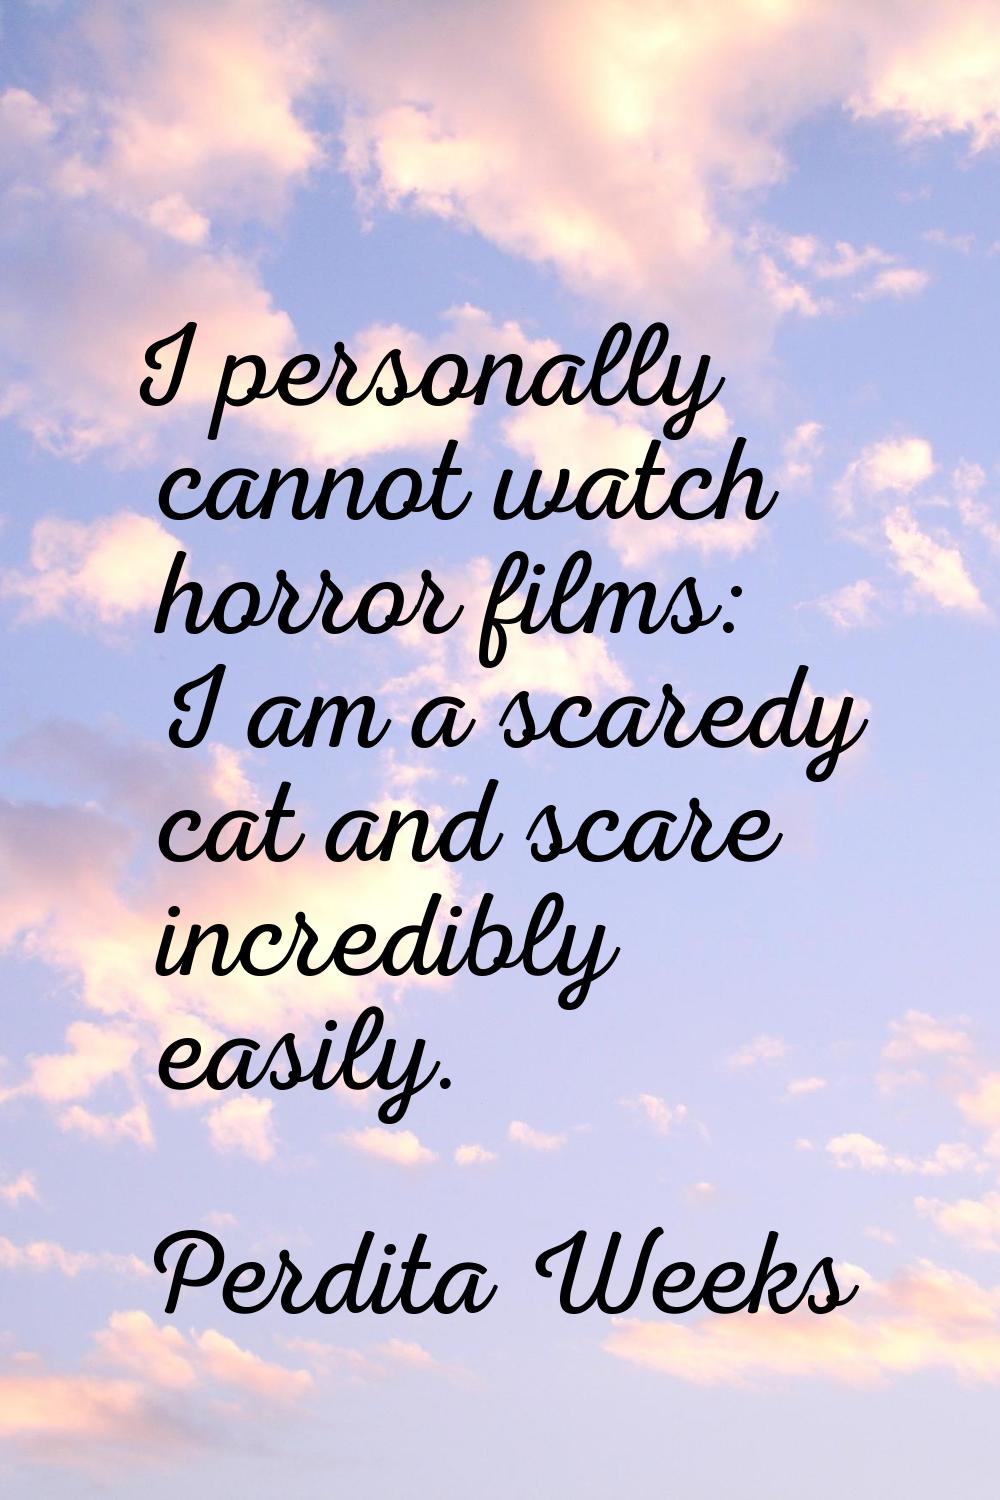 I personally cannot watch horror films: I am a scaredy cat and scare incredibly easily.